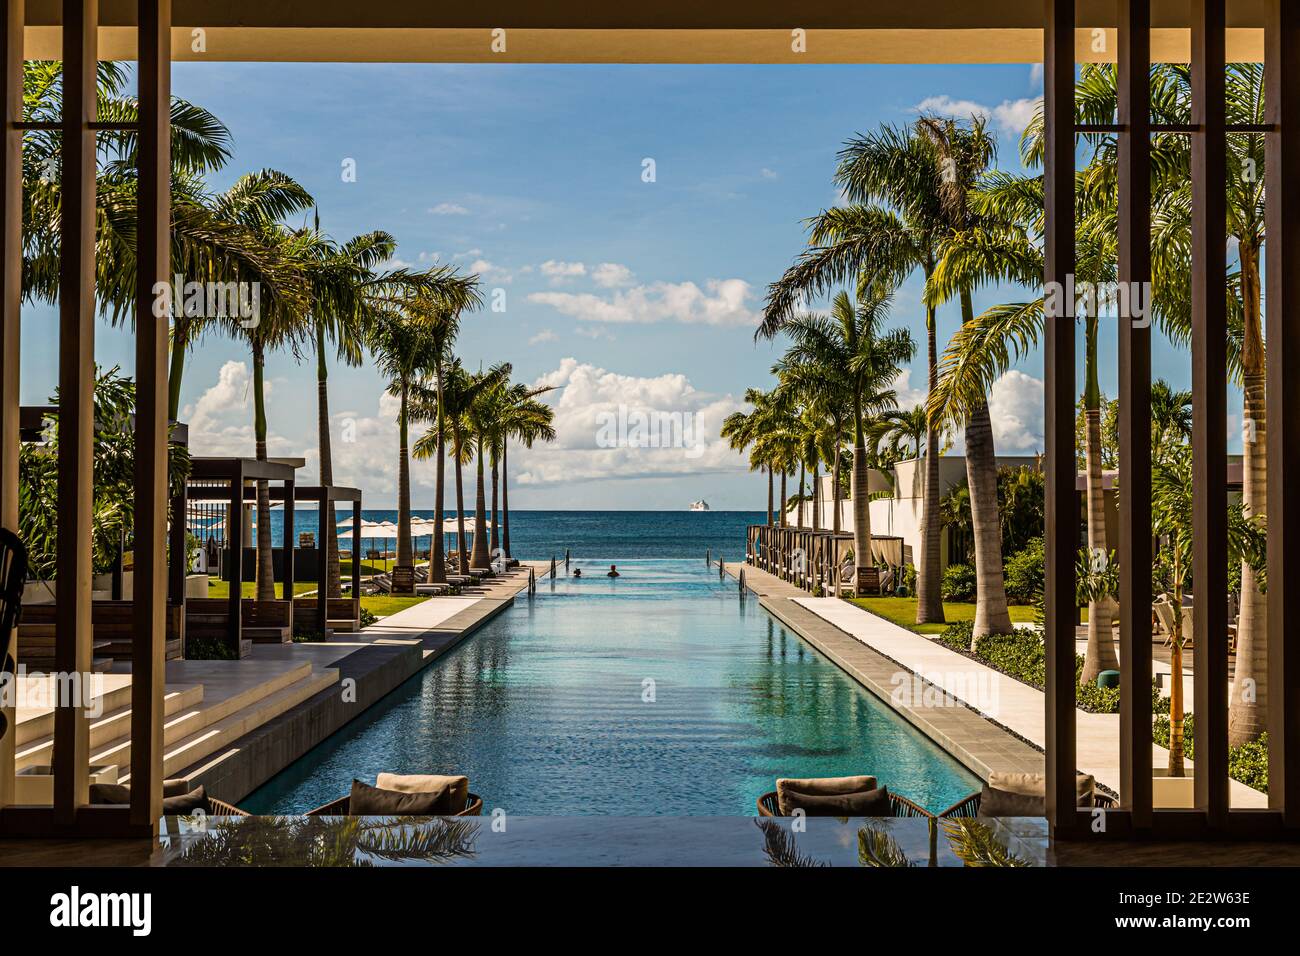 Infinity Pool of the Silversands Hotel on The Lime, Grenada Stock Photo